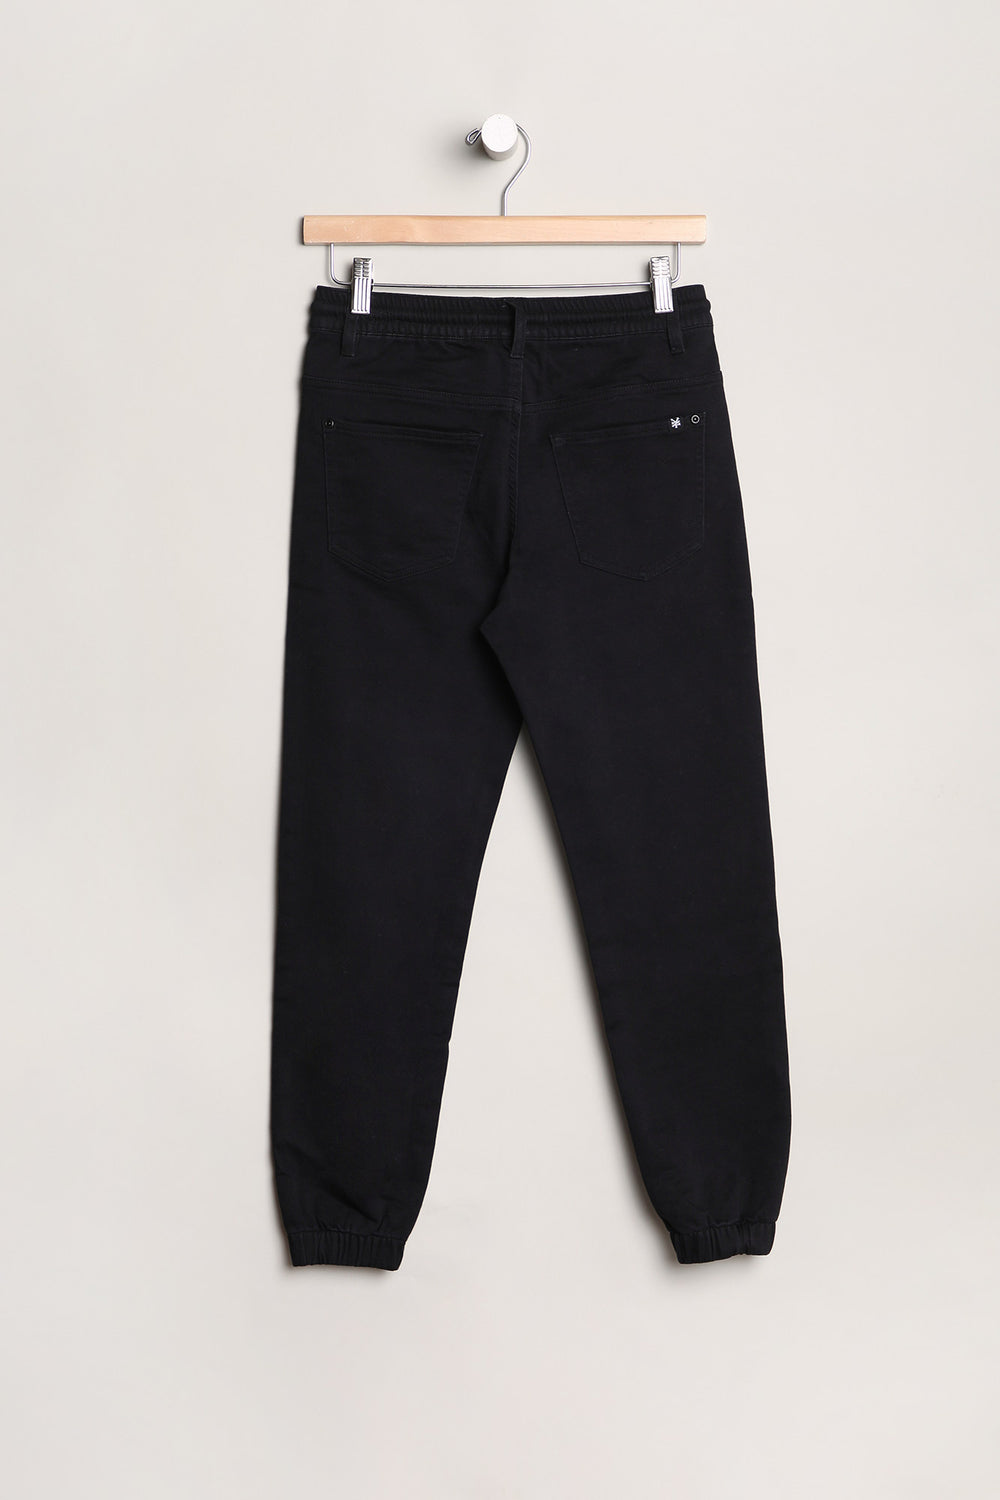 Zoo York Youth Relaxed Soft Denim Jogger Zoo York Youth Relaxed Soft Denim Jogger